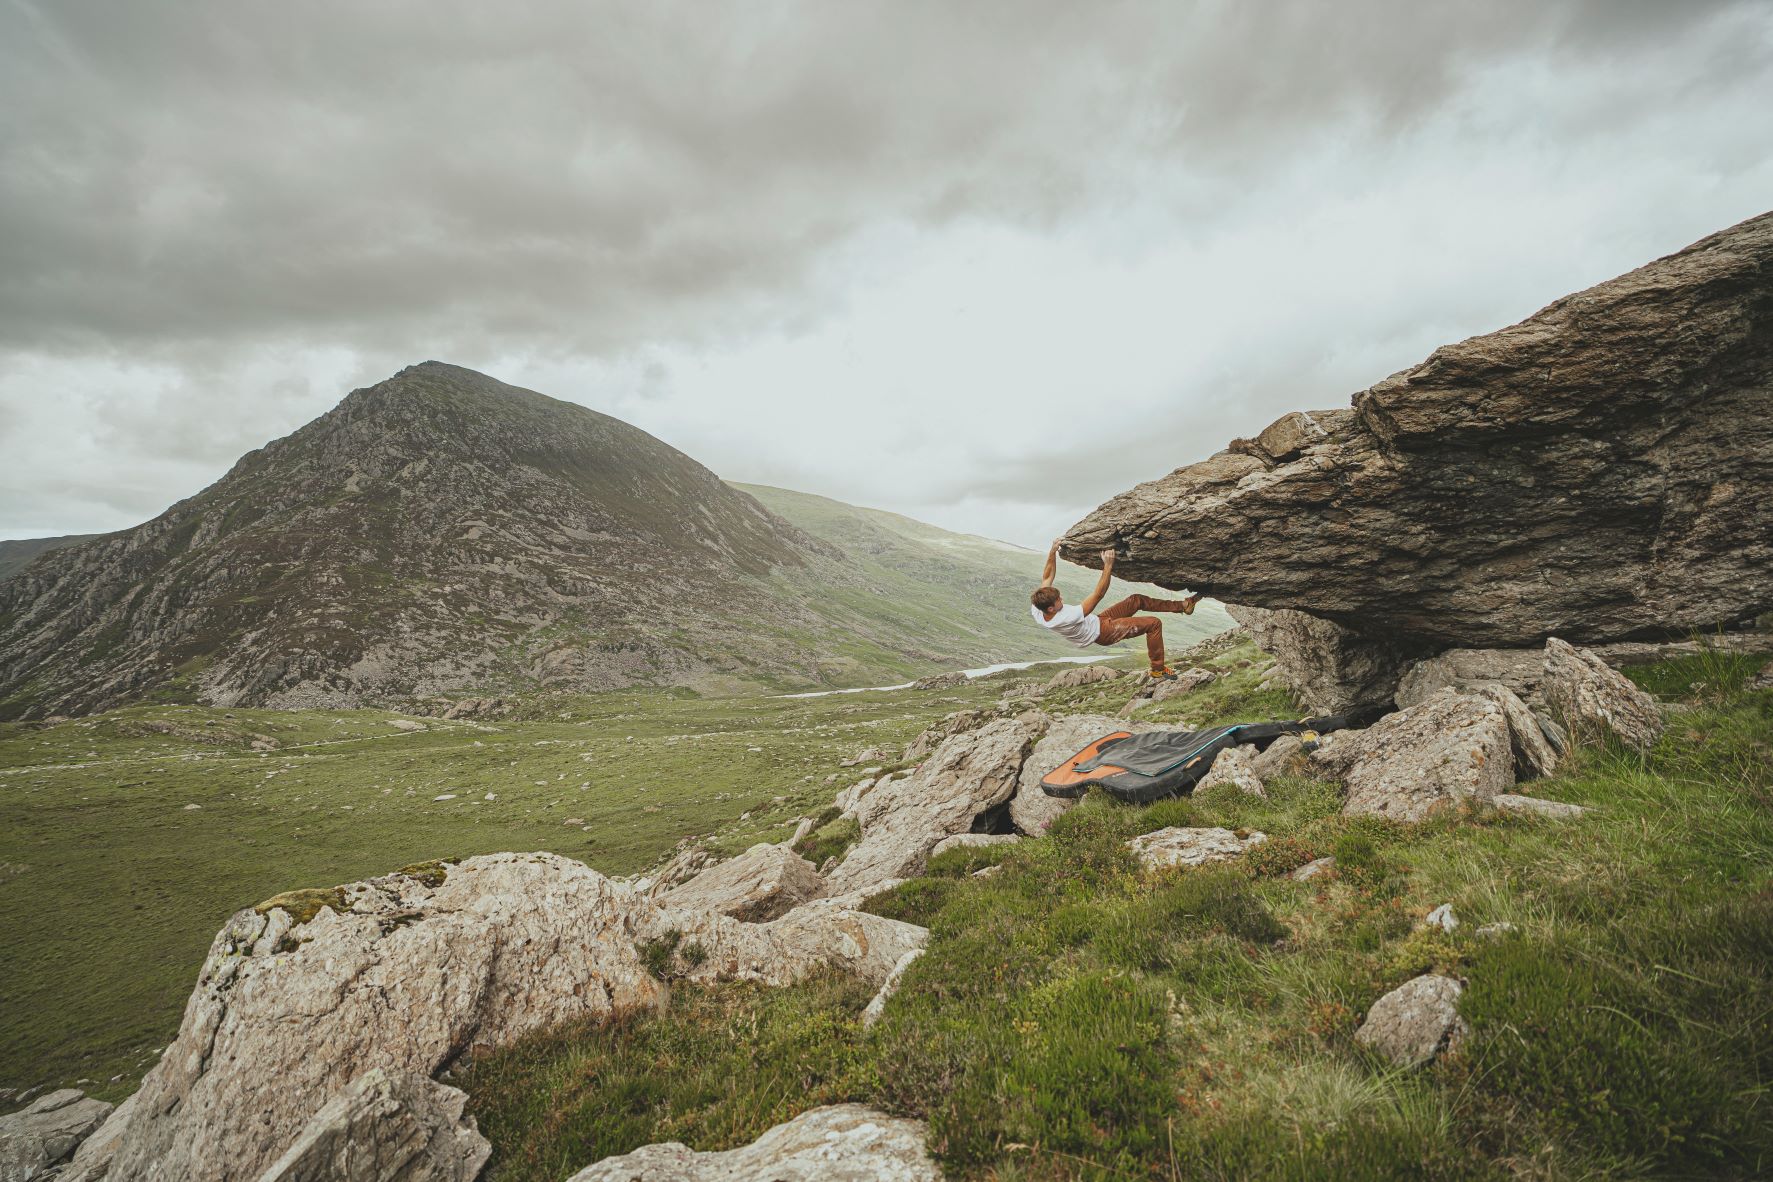 A climber bouldering in North Wales, UK